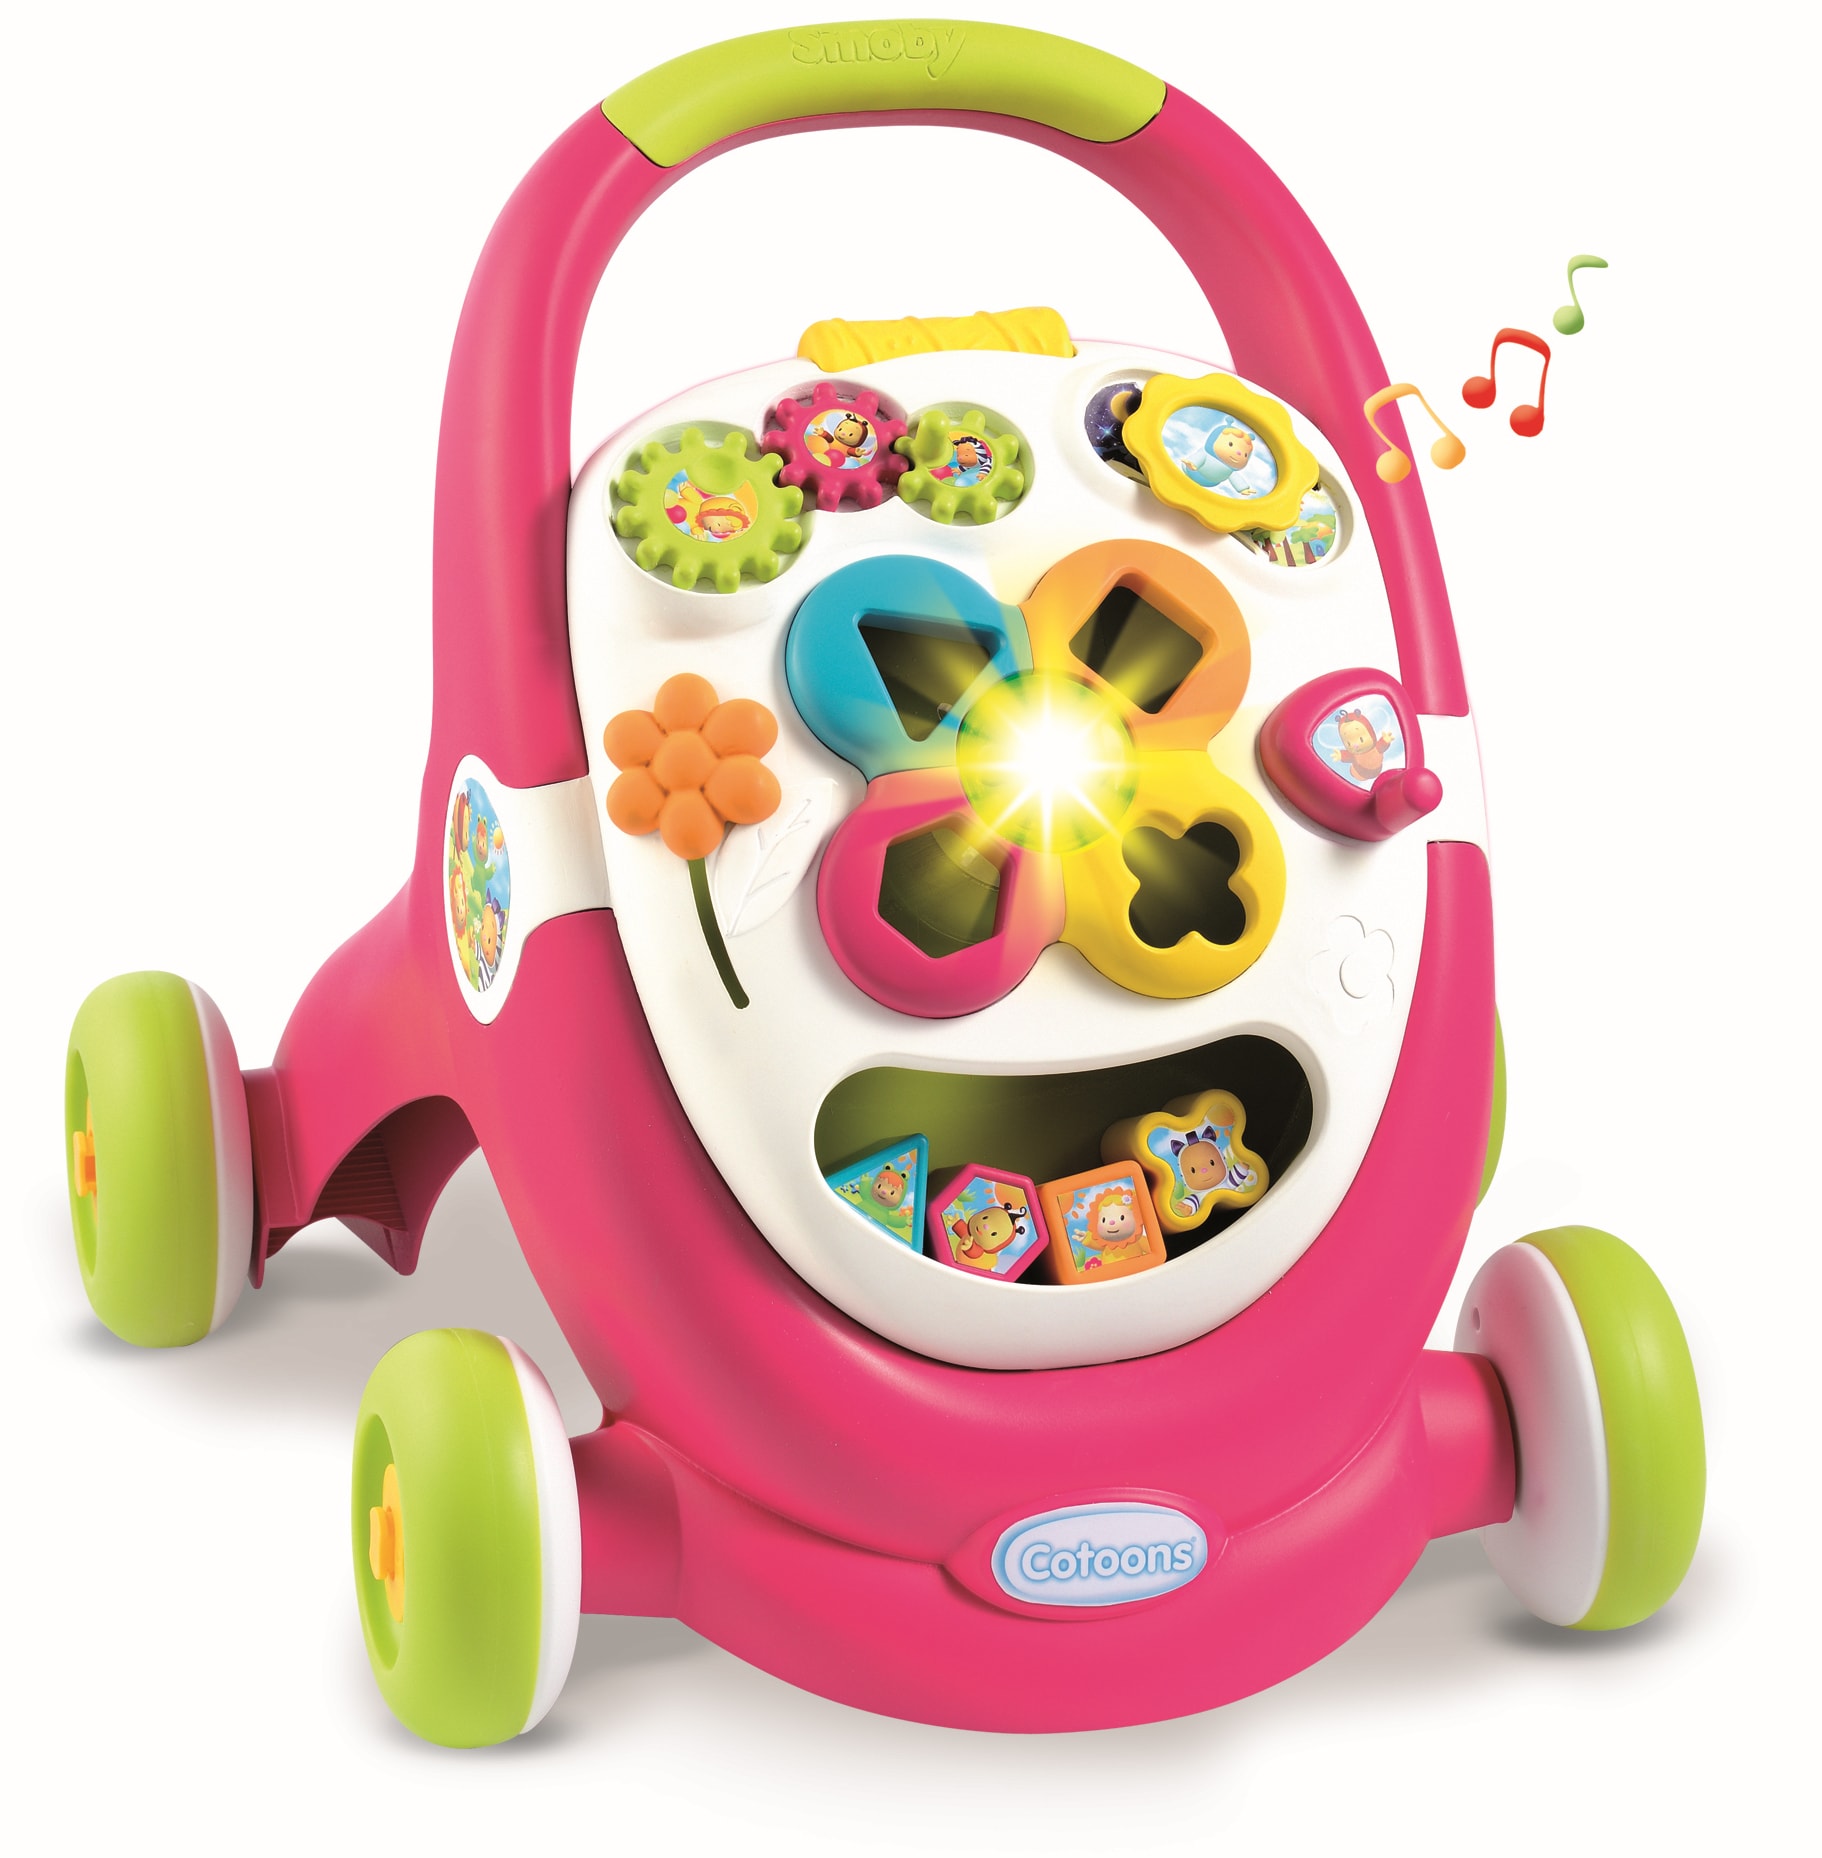 Trotteur SMOBY Walk & Play Cotoons rose 211024 Pas Cher 